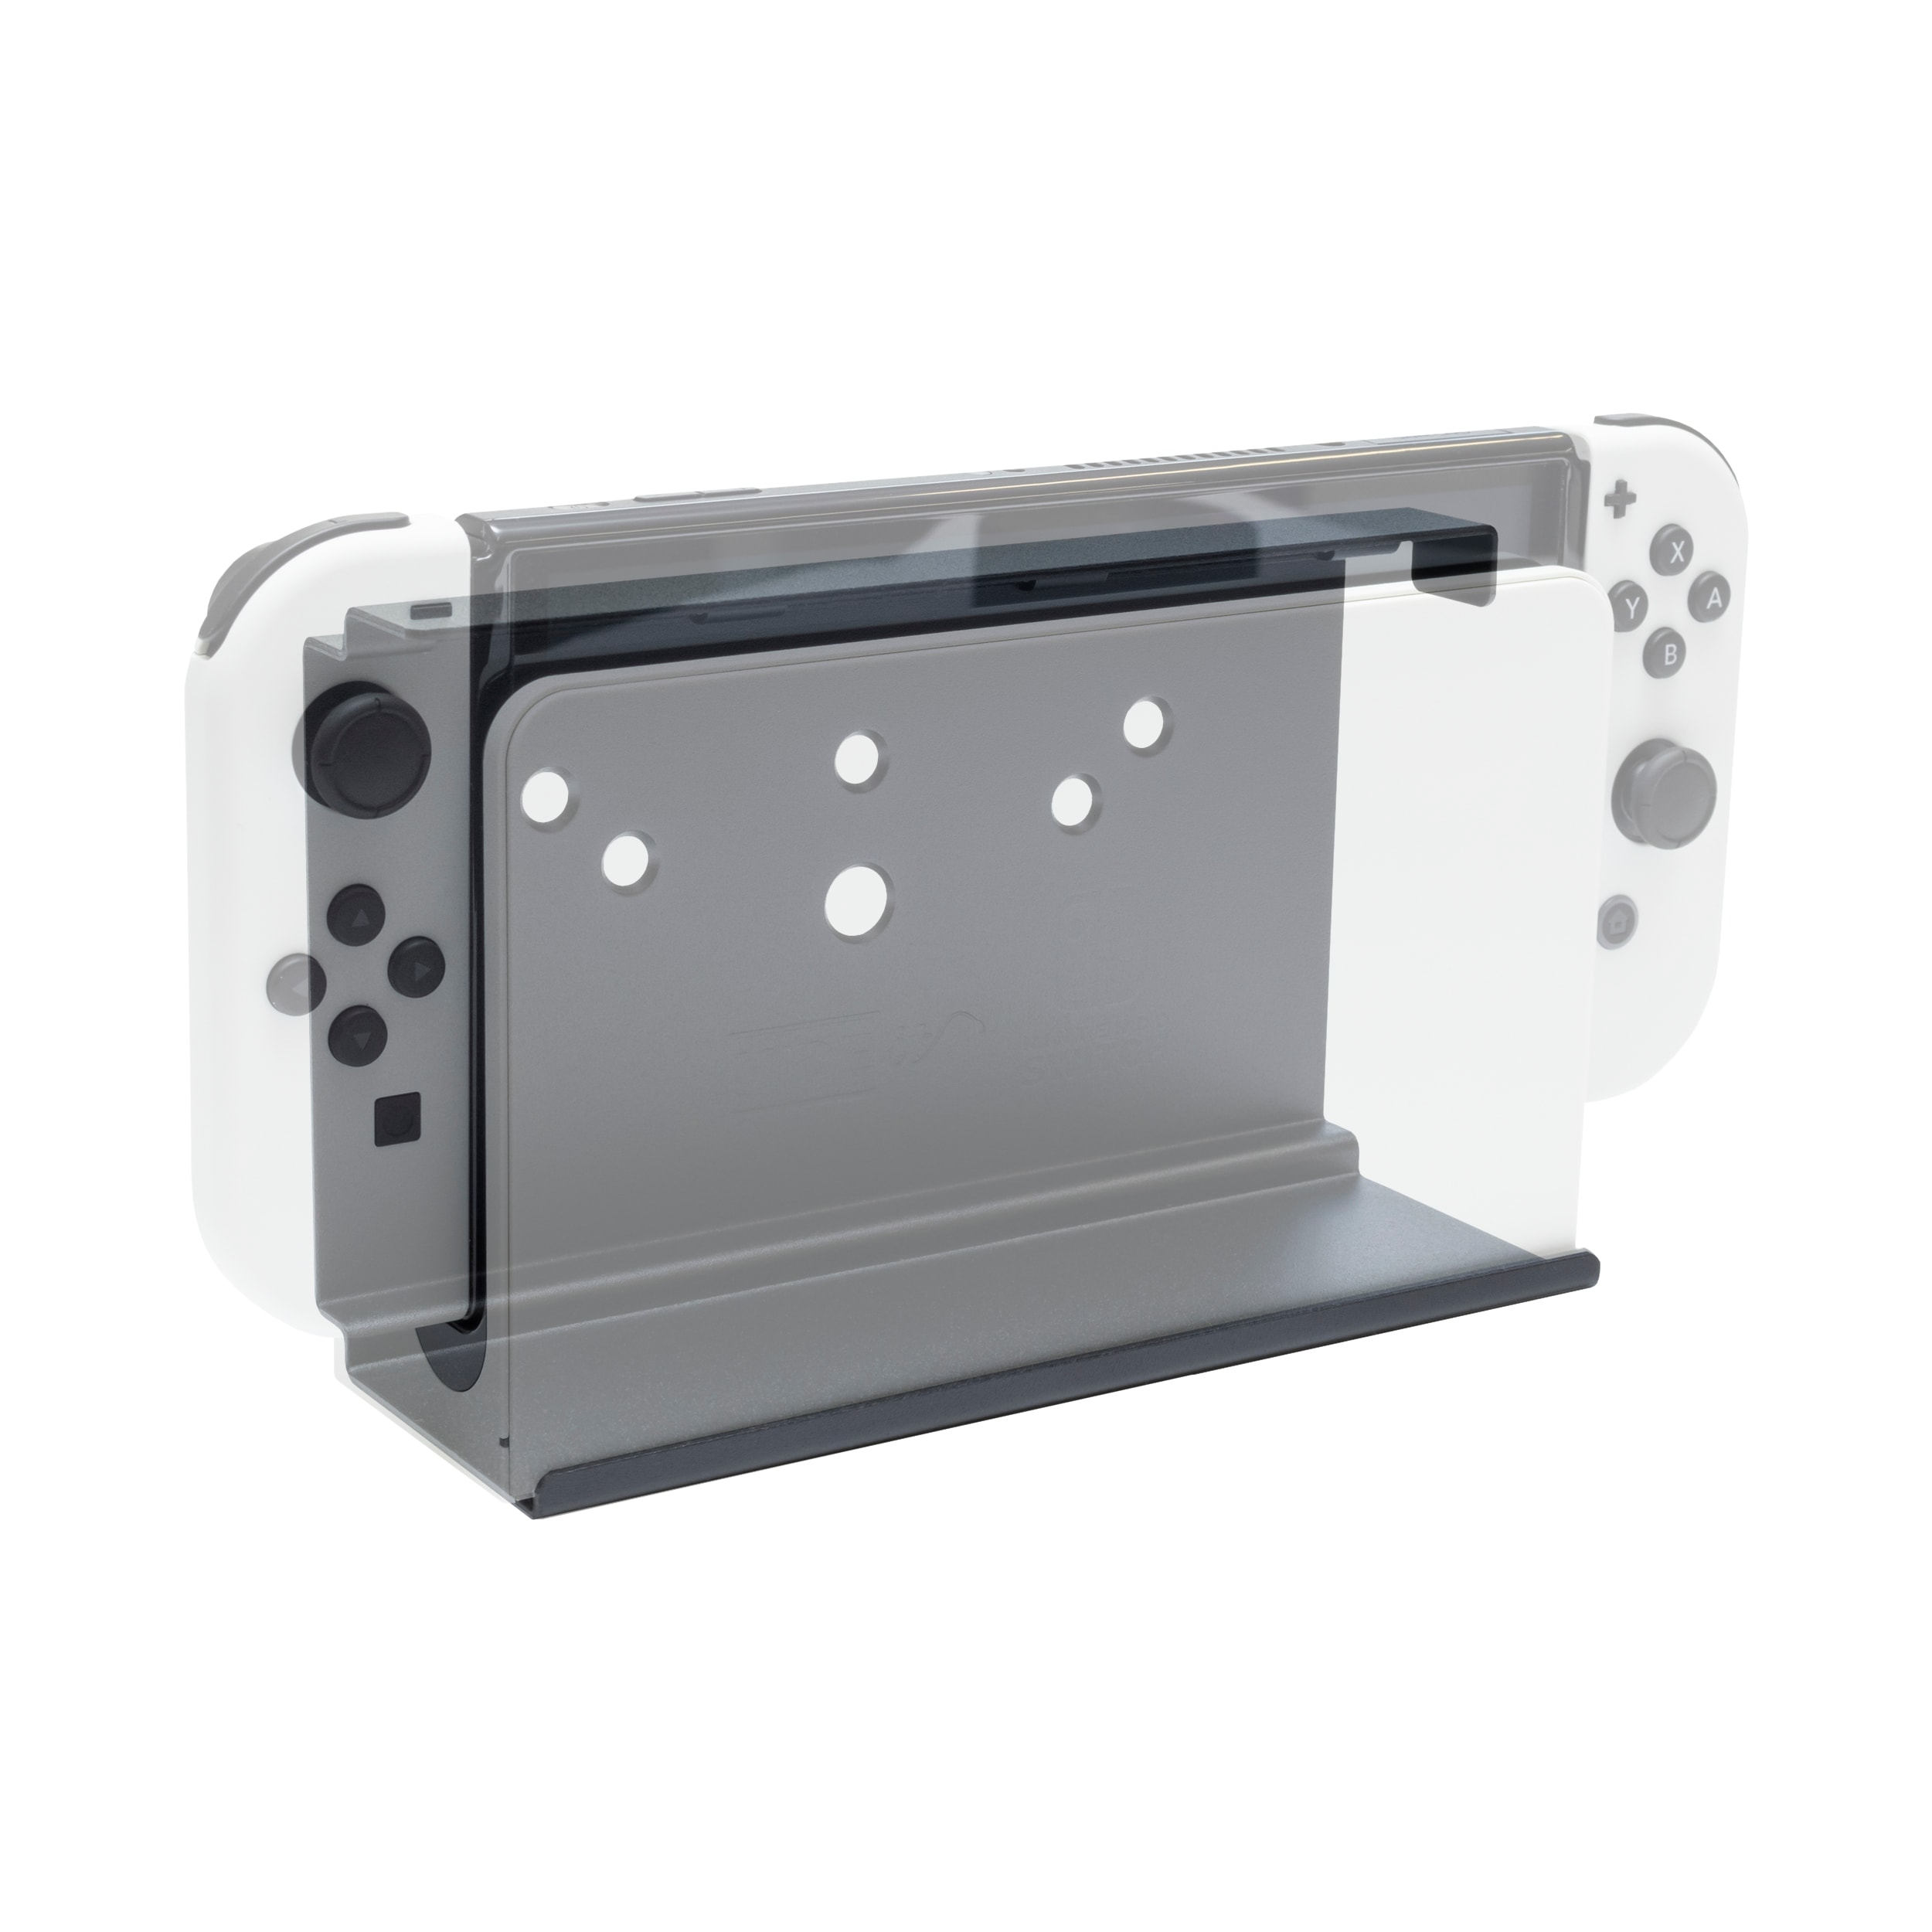 HIDEit Mounts Nintendo Switch Mount Compatible with OLED Switch